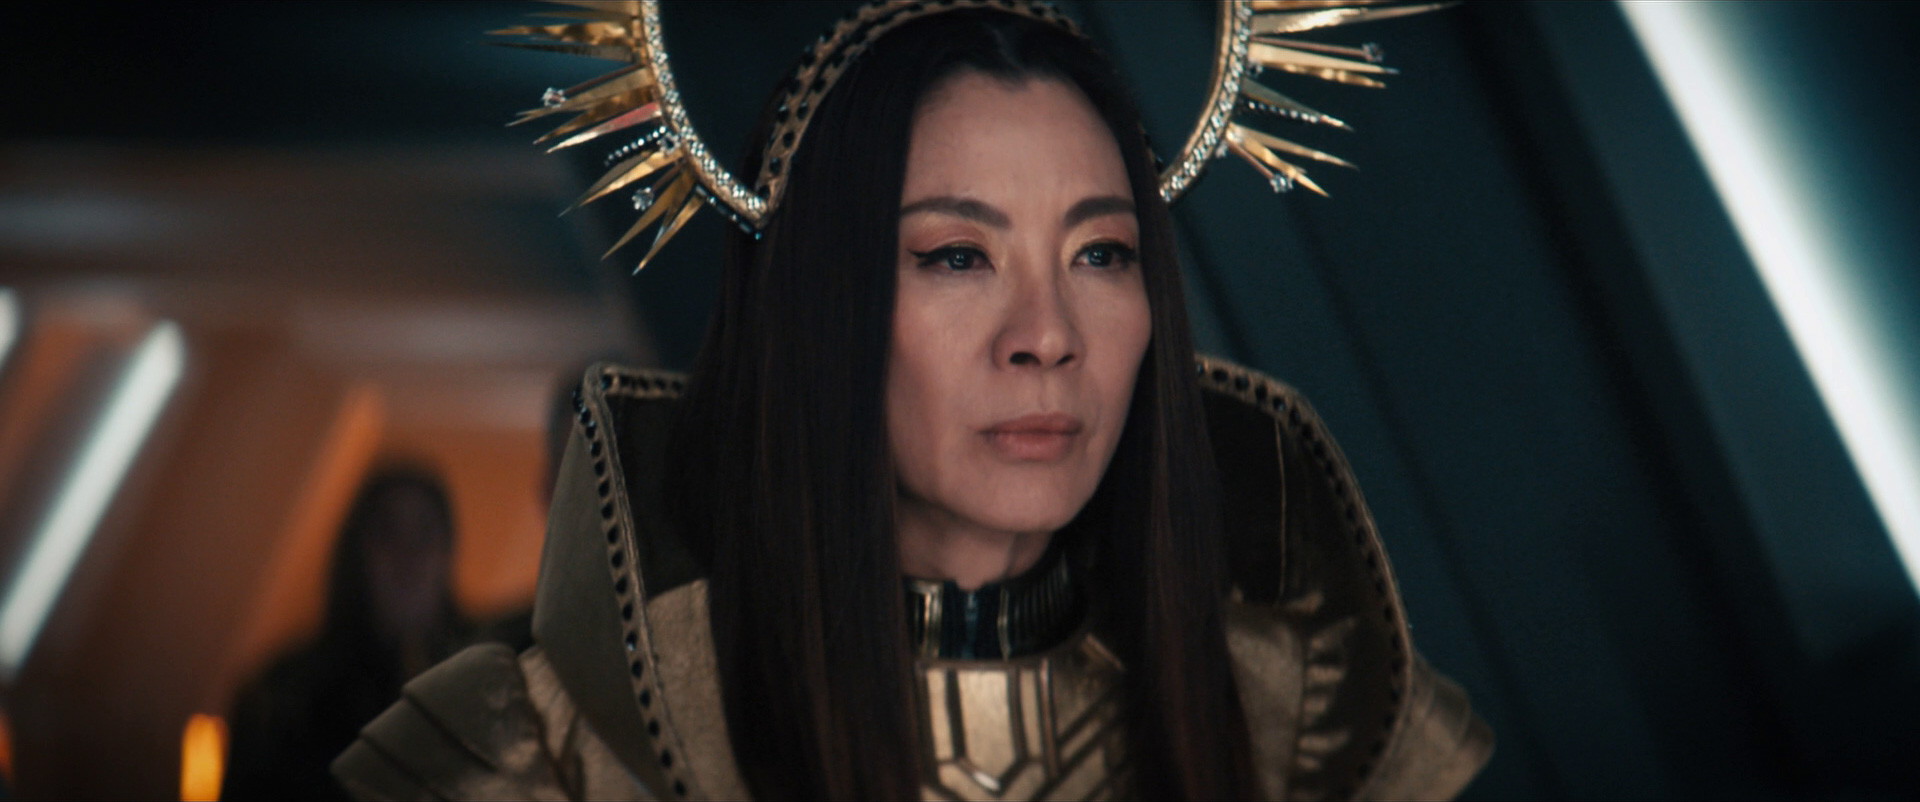 Michelle Yeoh as Emperor Philippa Georgiou wearing her crown in "Terra Firma, Part I"